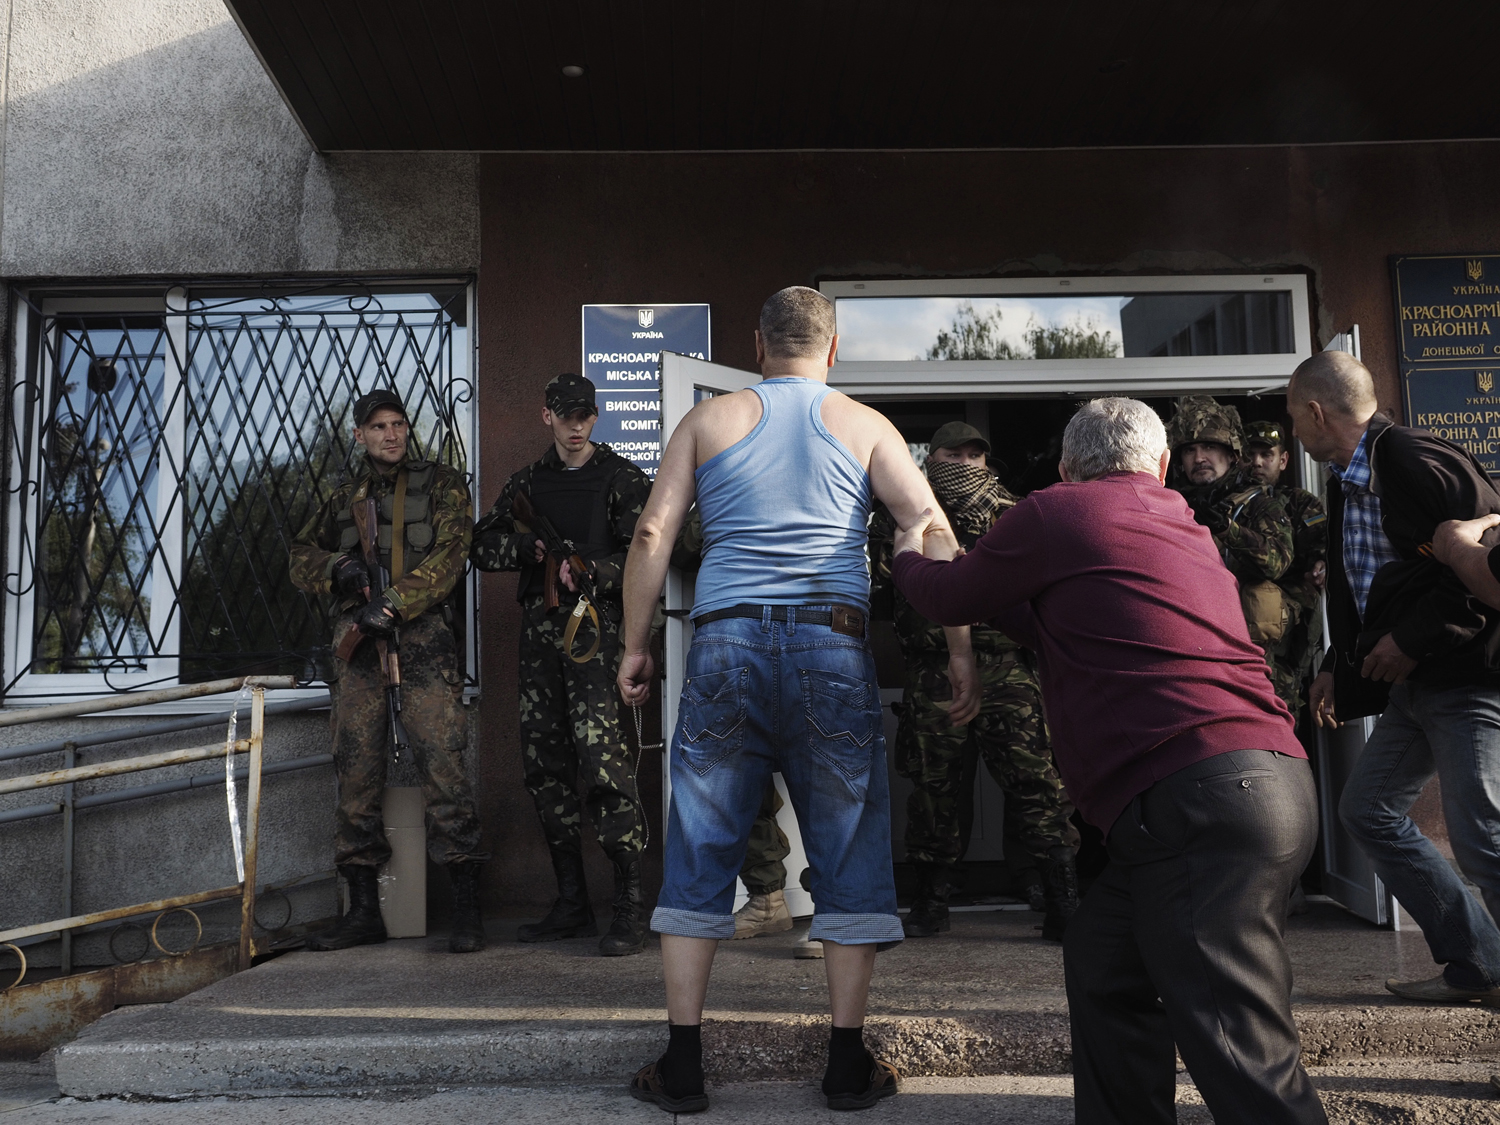 May 11, 2014. A man upset for not being able to vote in the illegal referendum confronts armed guards outside the polling location.